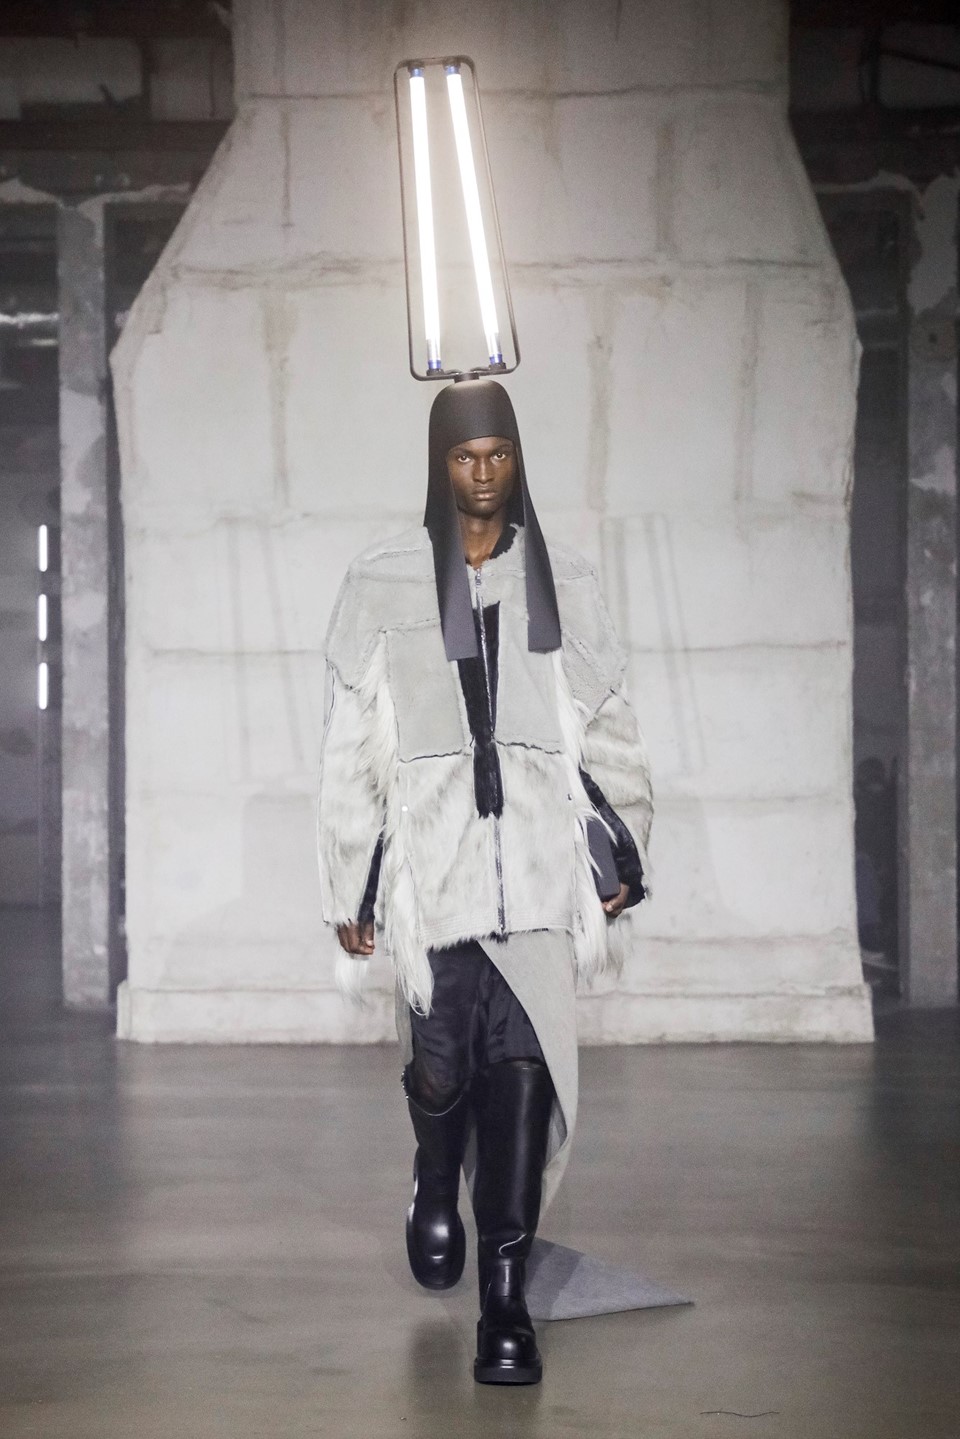 I Want Sleaze and Degeneracy”: Rick Owens on His Incandescent